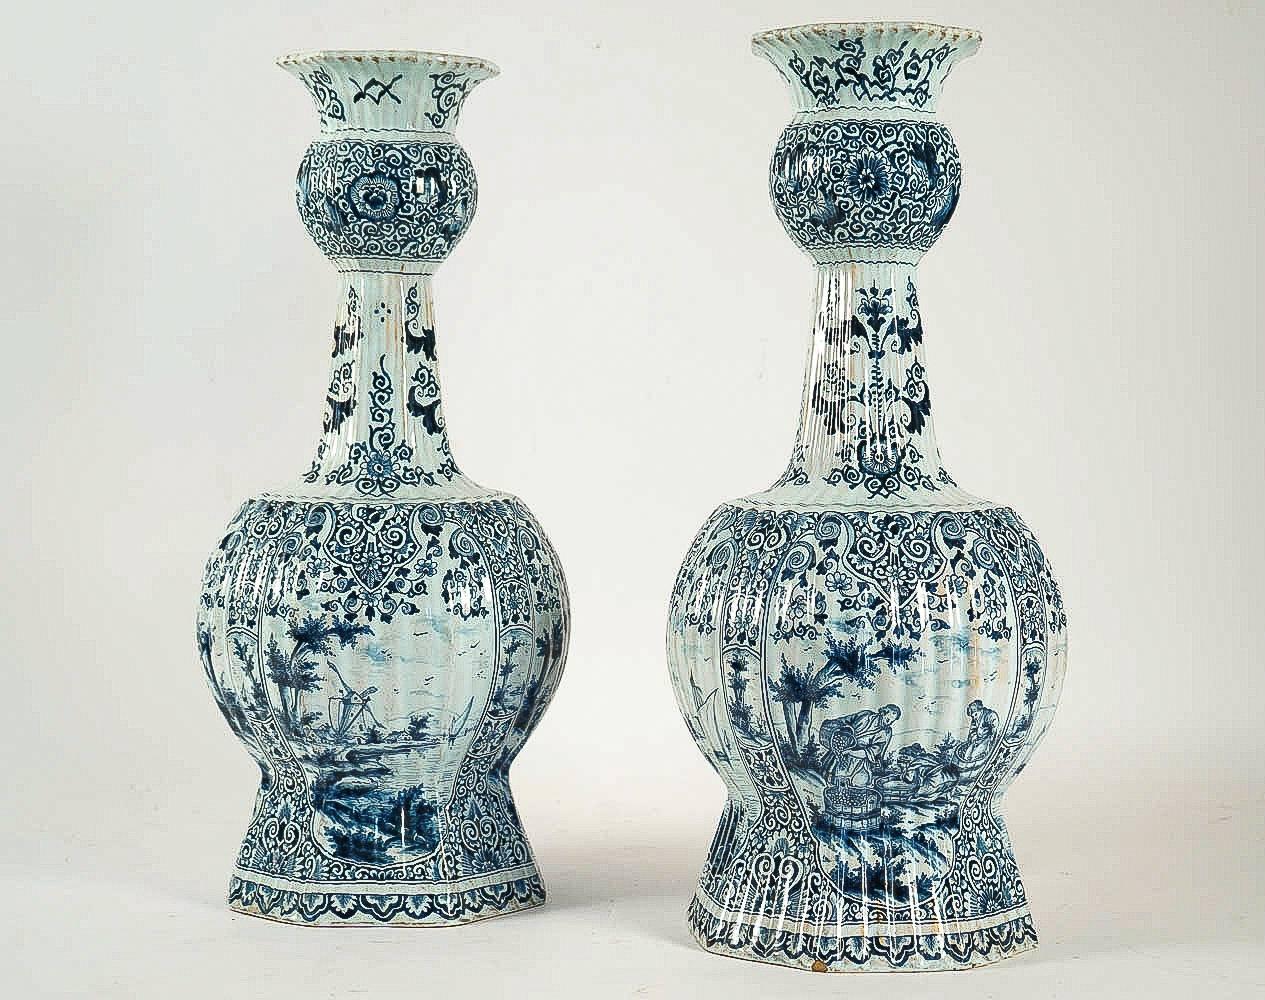 A rare and a monumental Delft faience blue cameo and a white color pair of gourd-shaped vases or gourd-shaped, decorated with an hand-painted landscape and farmer scene, opaque tin glazes that made in Delft 17th or 18th century.

Our pair of vases